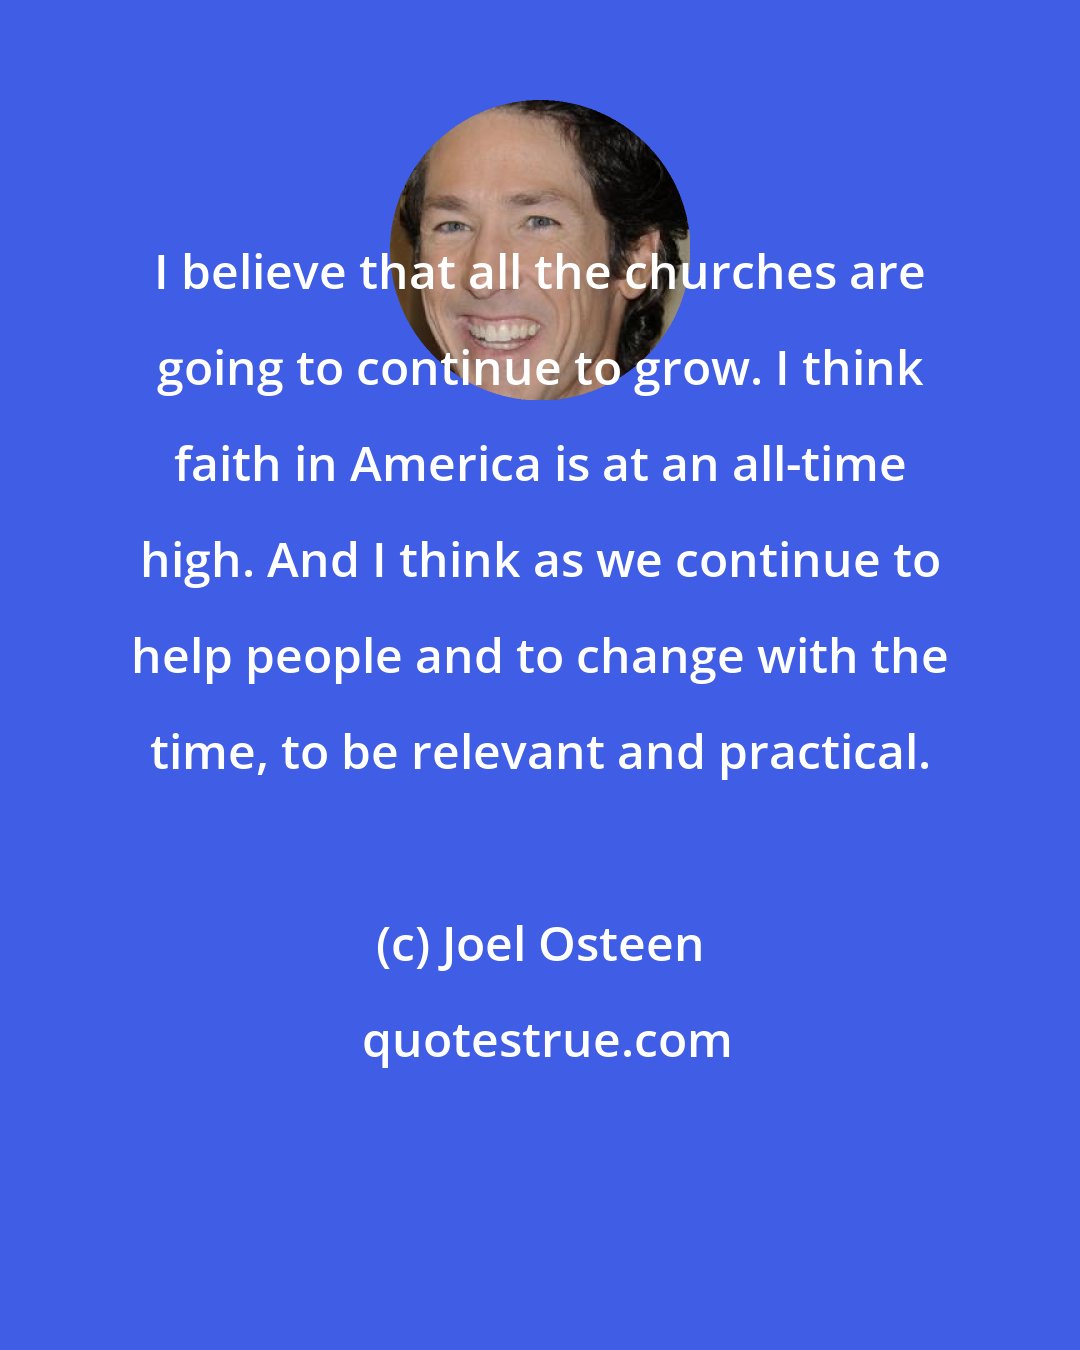 Joel Osteen: I believe that all the churches are going to continue to grow. I think faith in America is at an all-time high. And I think as we continue to help people and to change with the time, to be relevant and practical.